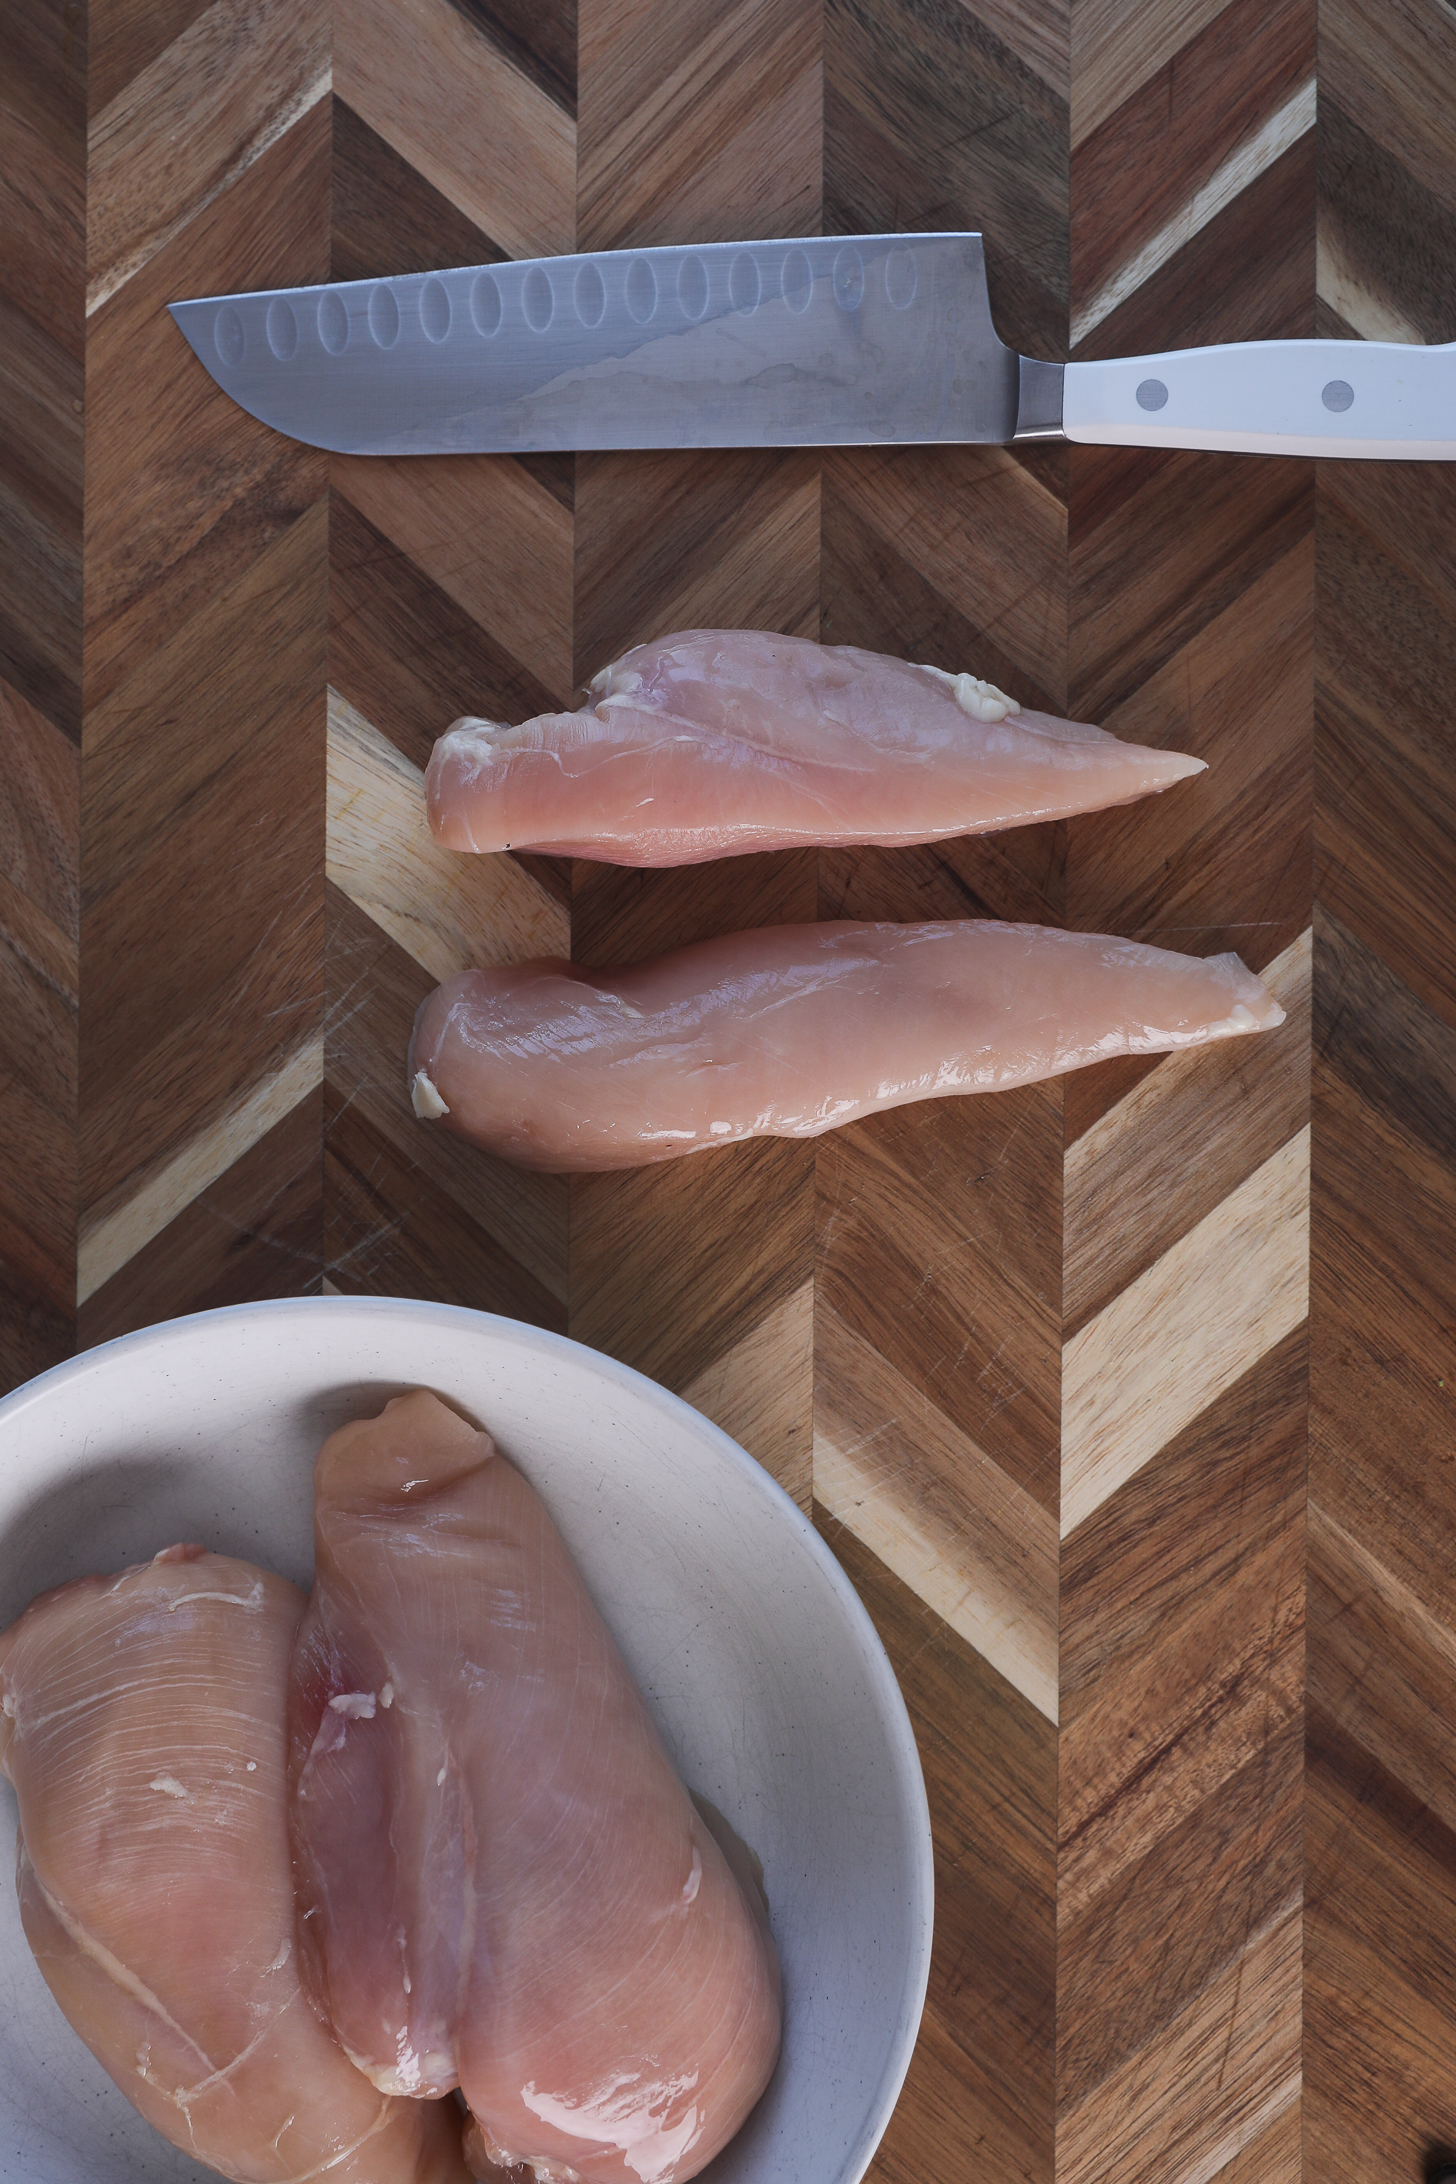 A chicken breast fillet sliced in half (lengthwise) on a wooden board with a nearby knife and a bowl of additional chicken breast fillets.